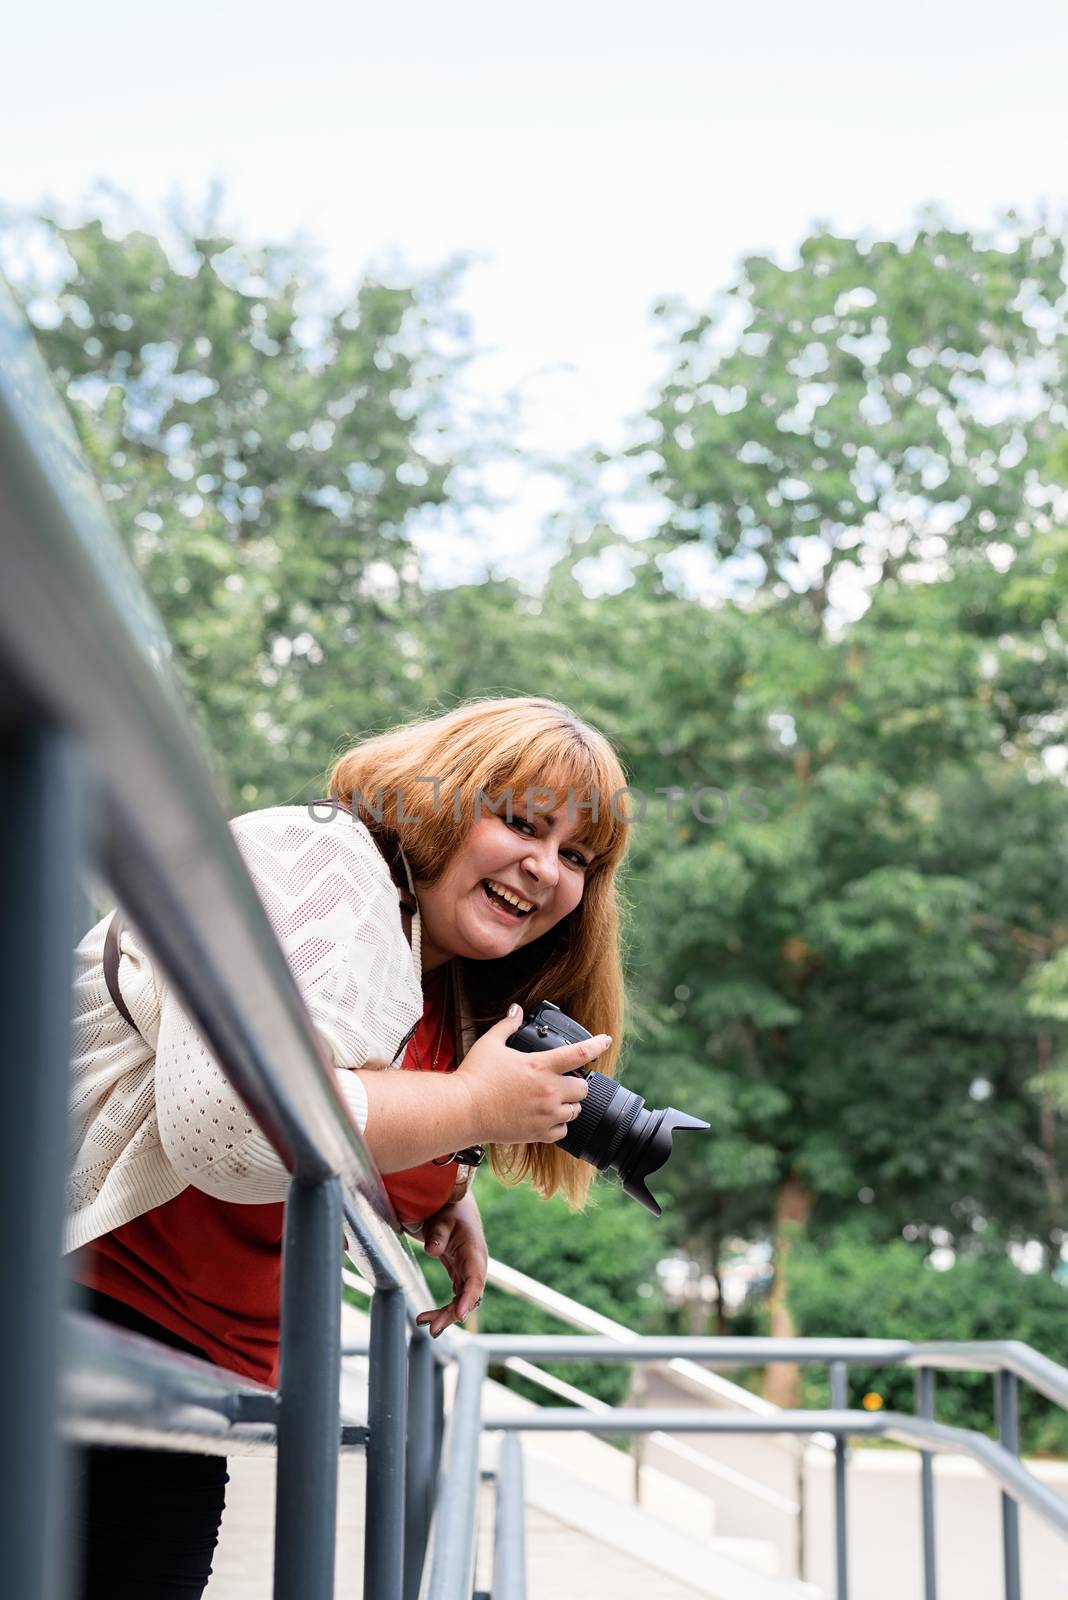 Plus size woman photographer outdoors holding a camera and laughing by Desperada